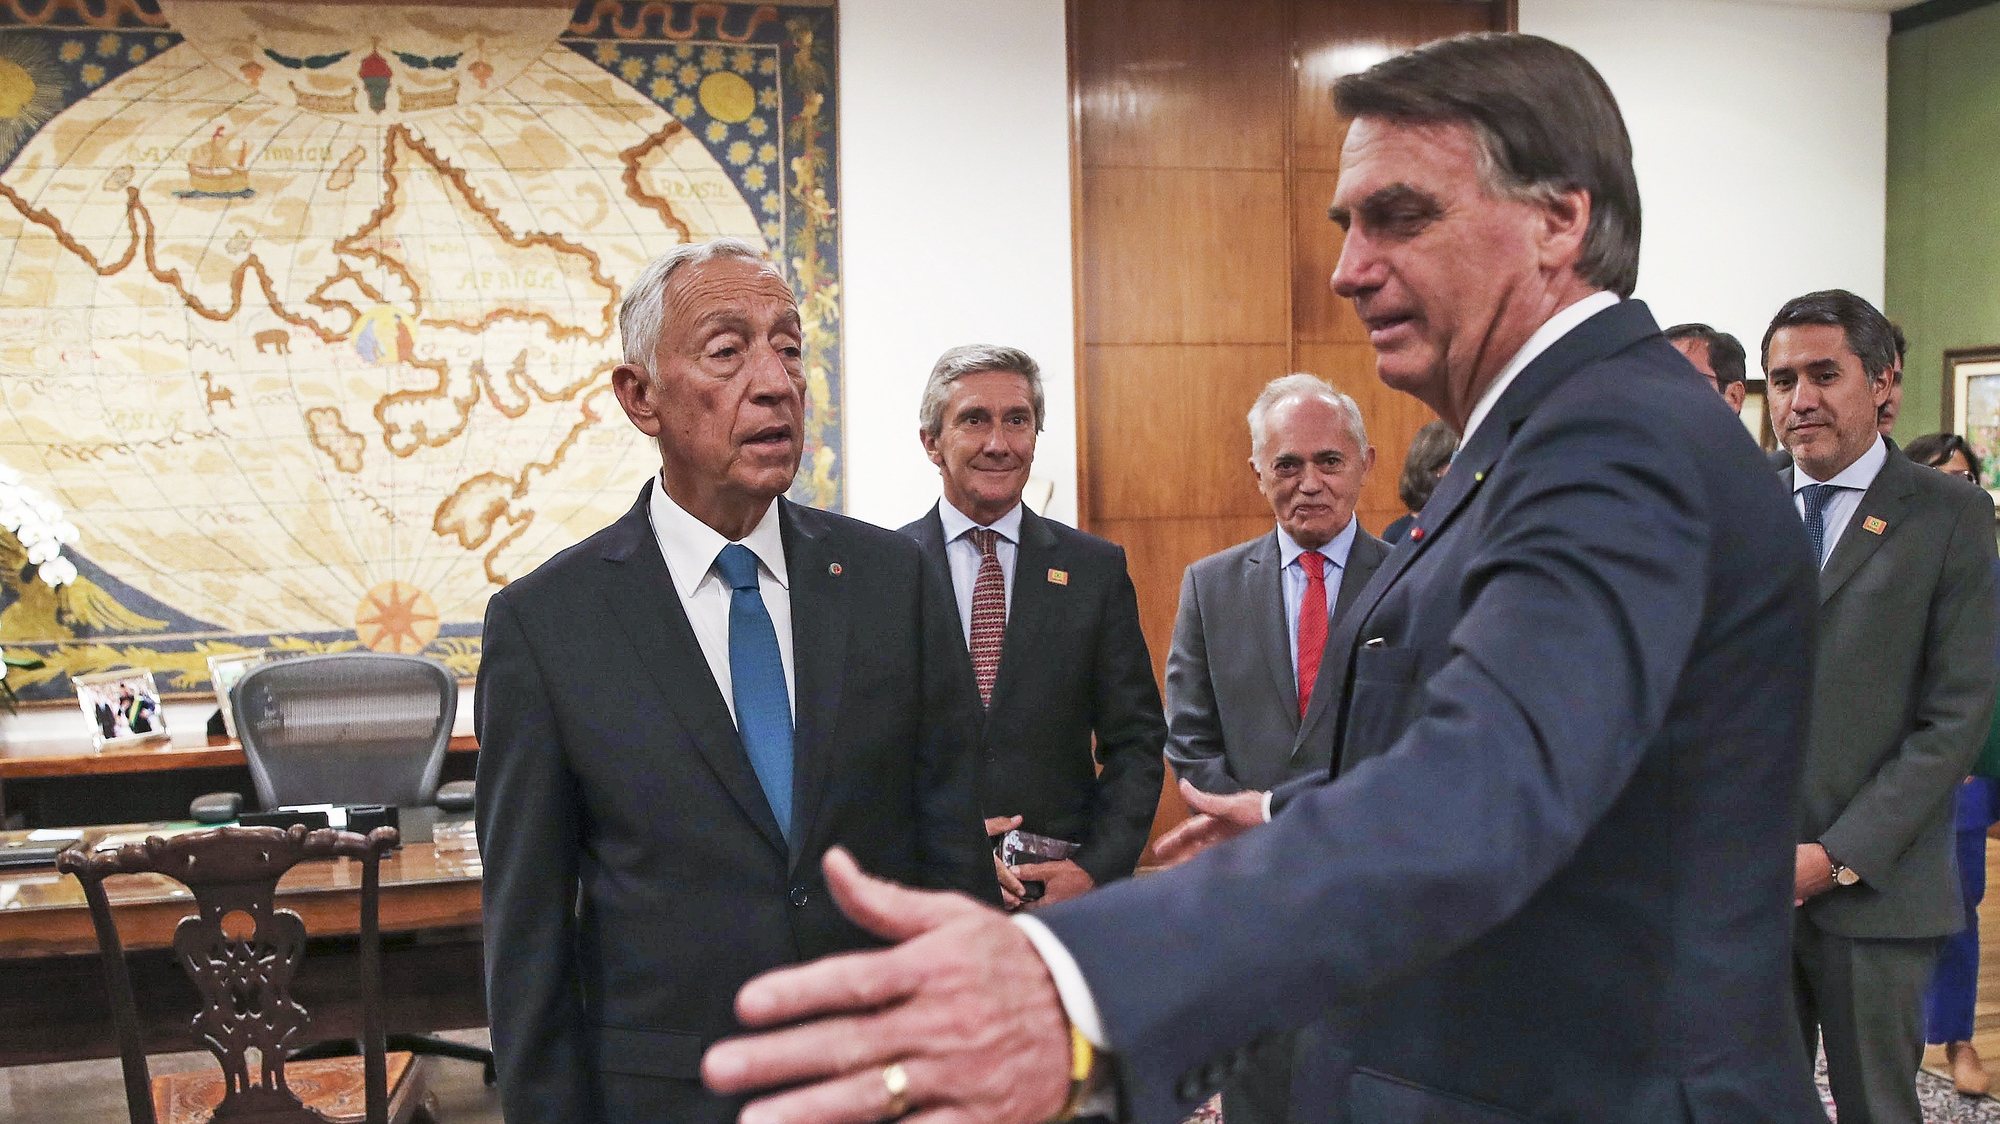 Portuguese President Marcelo Rebelo de Sousa (L) is welcomed by Brazil President Jair Bolsonaro (R) moments before a meeting at Itamaraty Palace, in Brasília, Brasil, 6 September 2022. Marcelo Rebelo de Sousa is in a visit on the occasion of the Commemorations of the Bicentennial of Brazil Independence. MANUEL DE ALMEIDA / LUSA